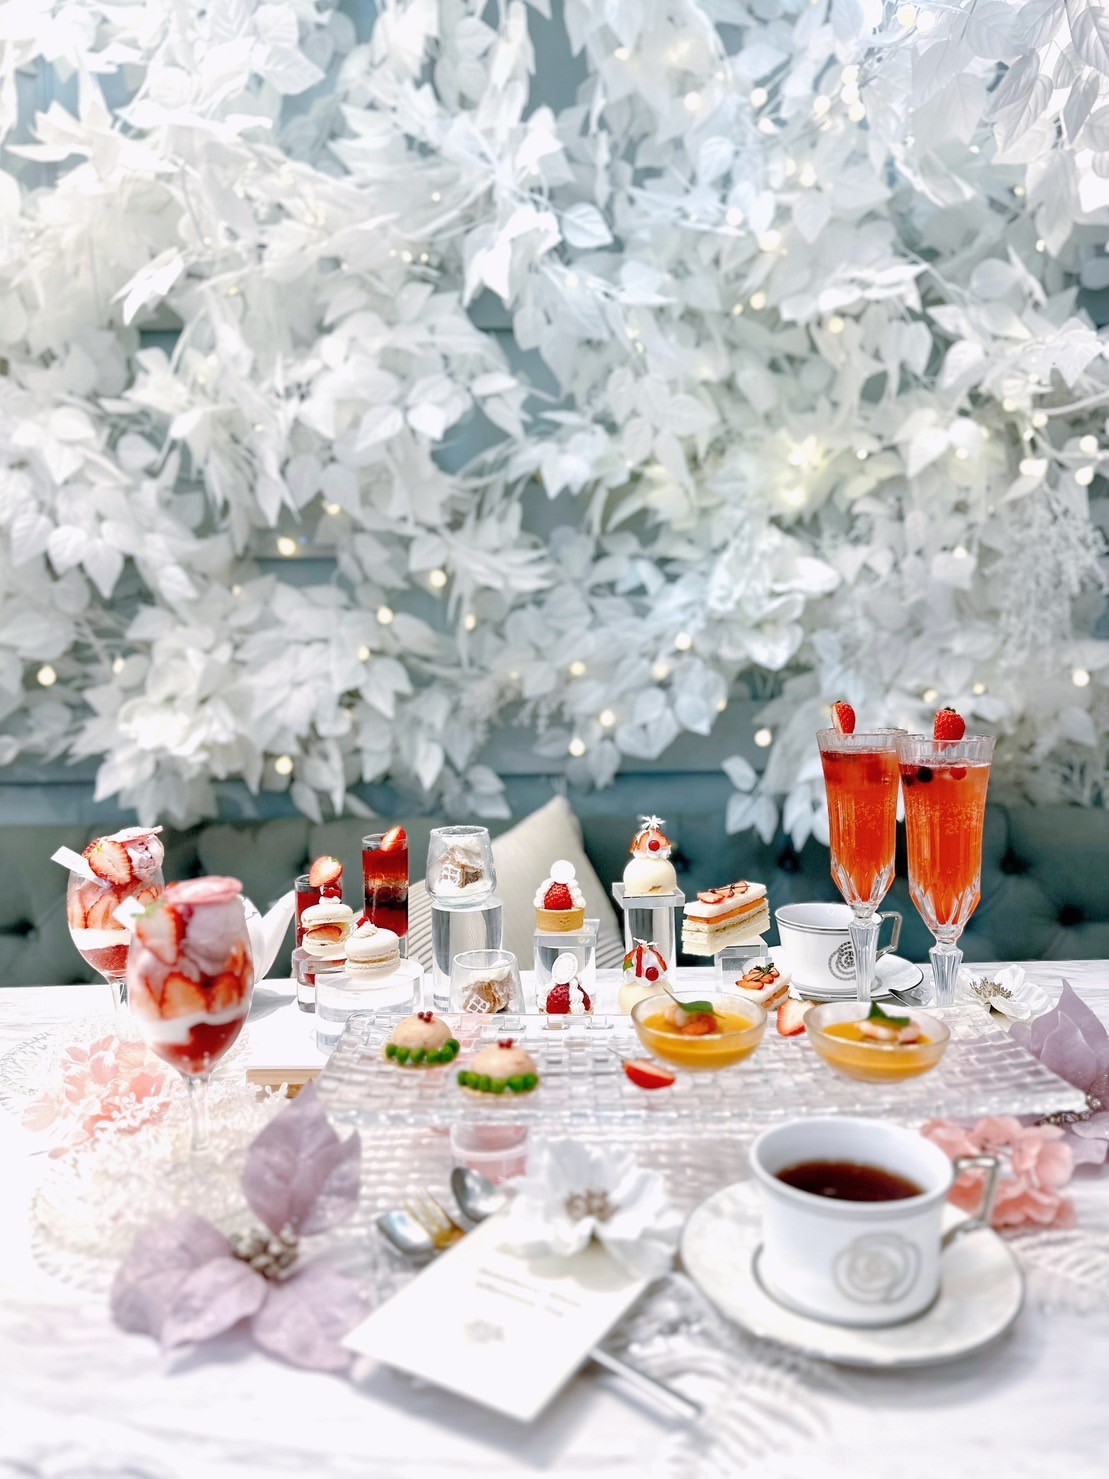 Strawberry White afternoontea